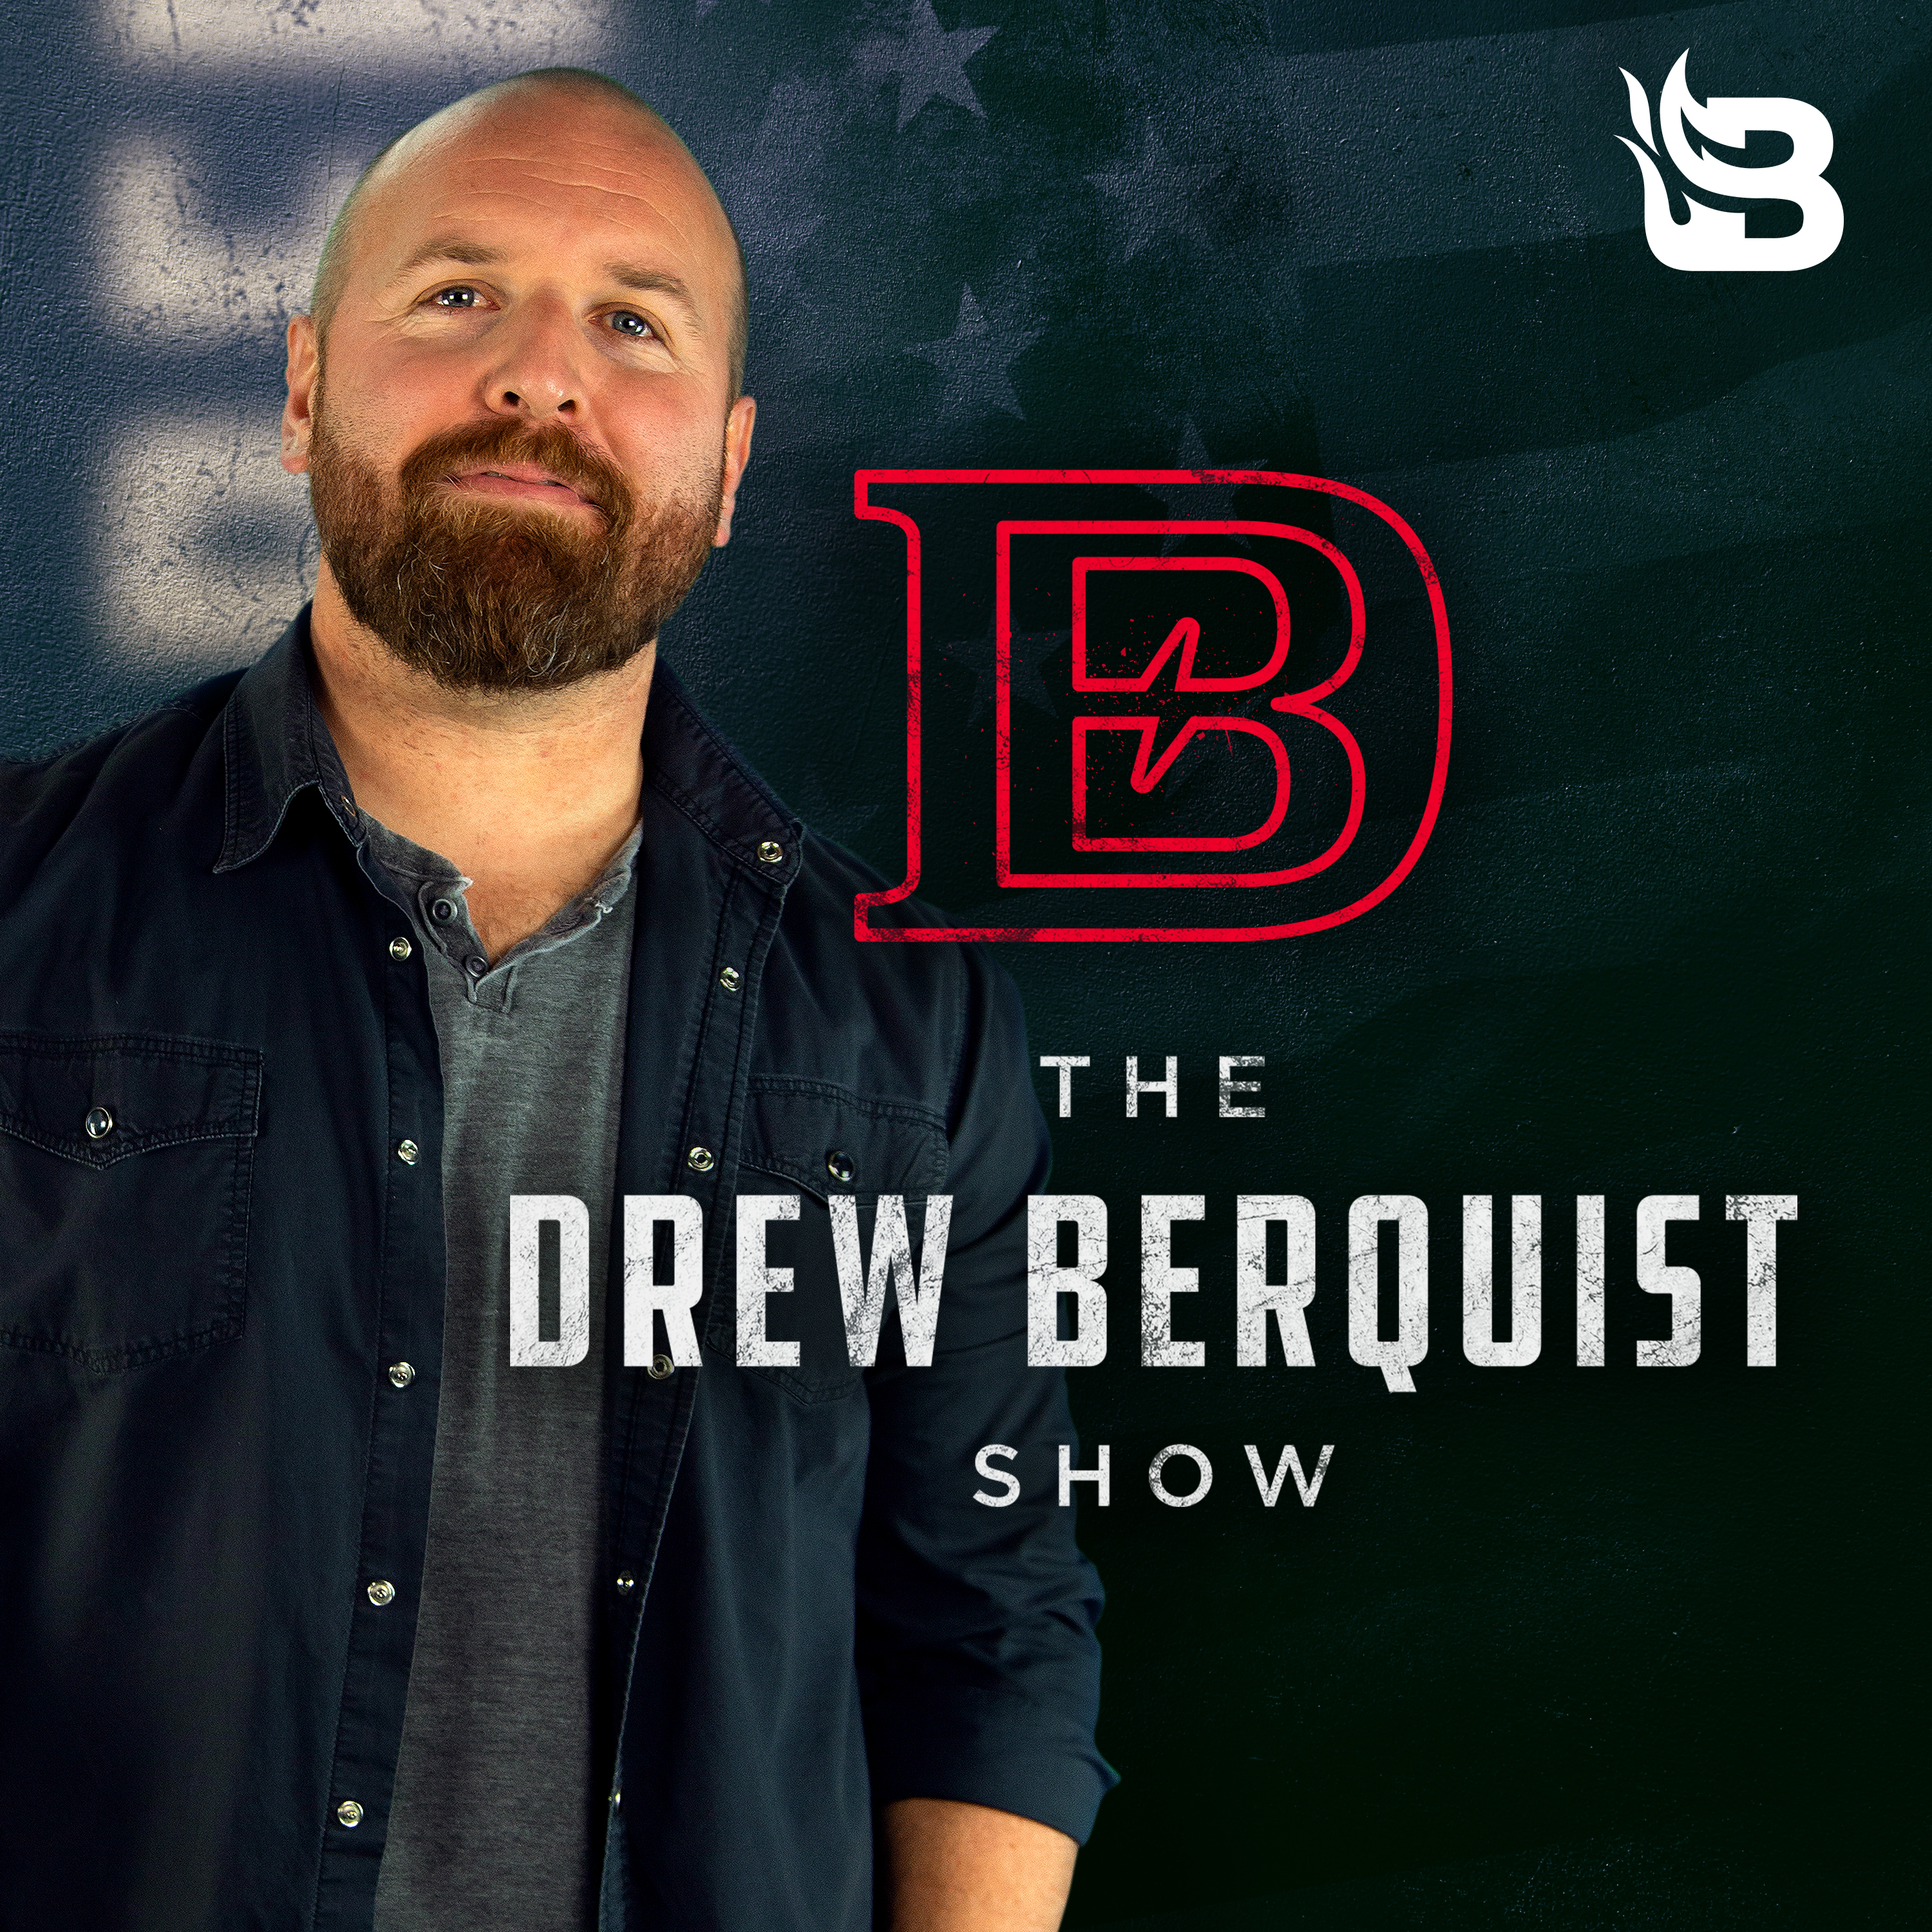 Ep 148 | Trump Twitter Spree | Napolitano: Border Issue Not a Threat | The Drew Berquist Show